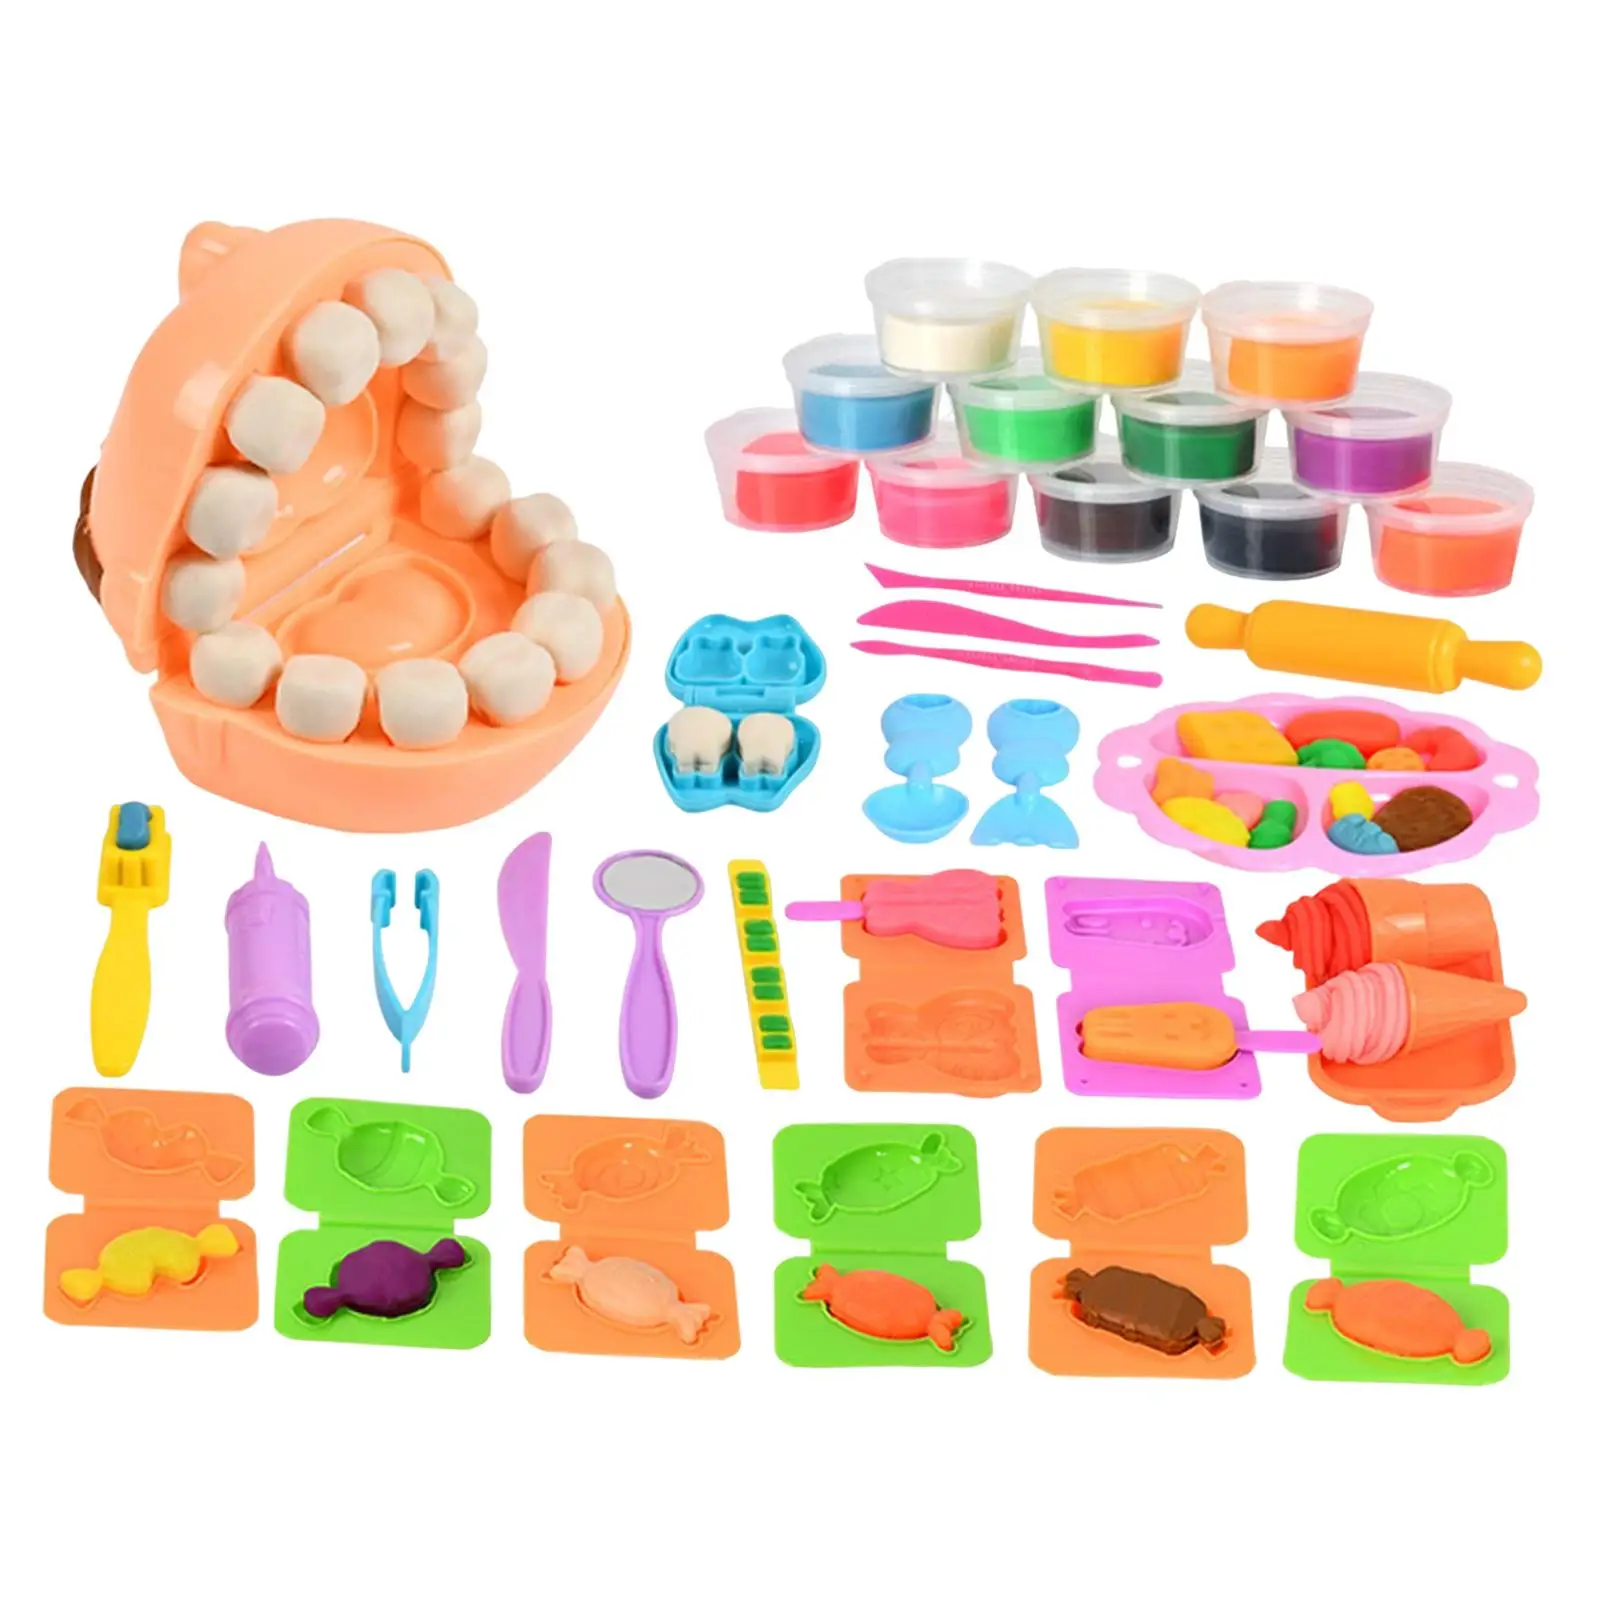 Modeling Clay Set Pretend Play 12 colors Crafts for Gift Children Girl